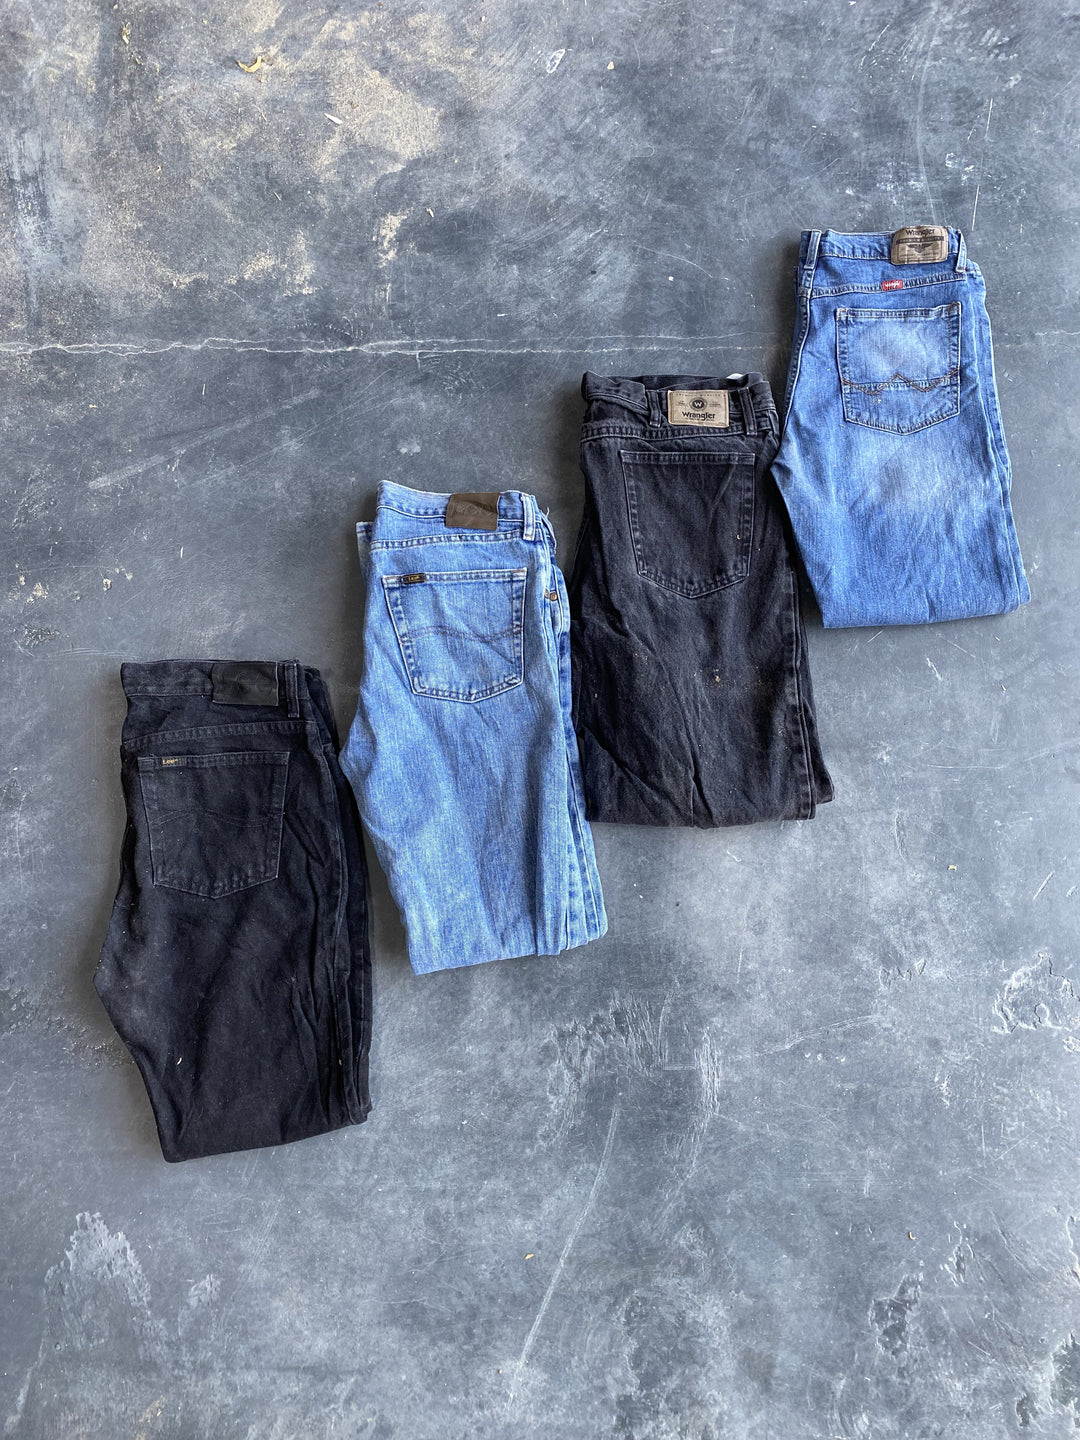 10 x Lee and Wrangler Jeans (Larger Sizes)